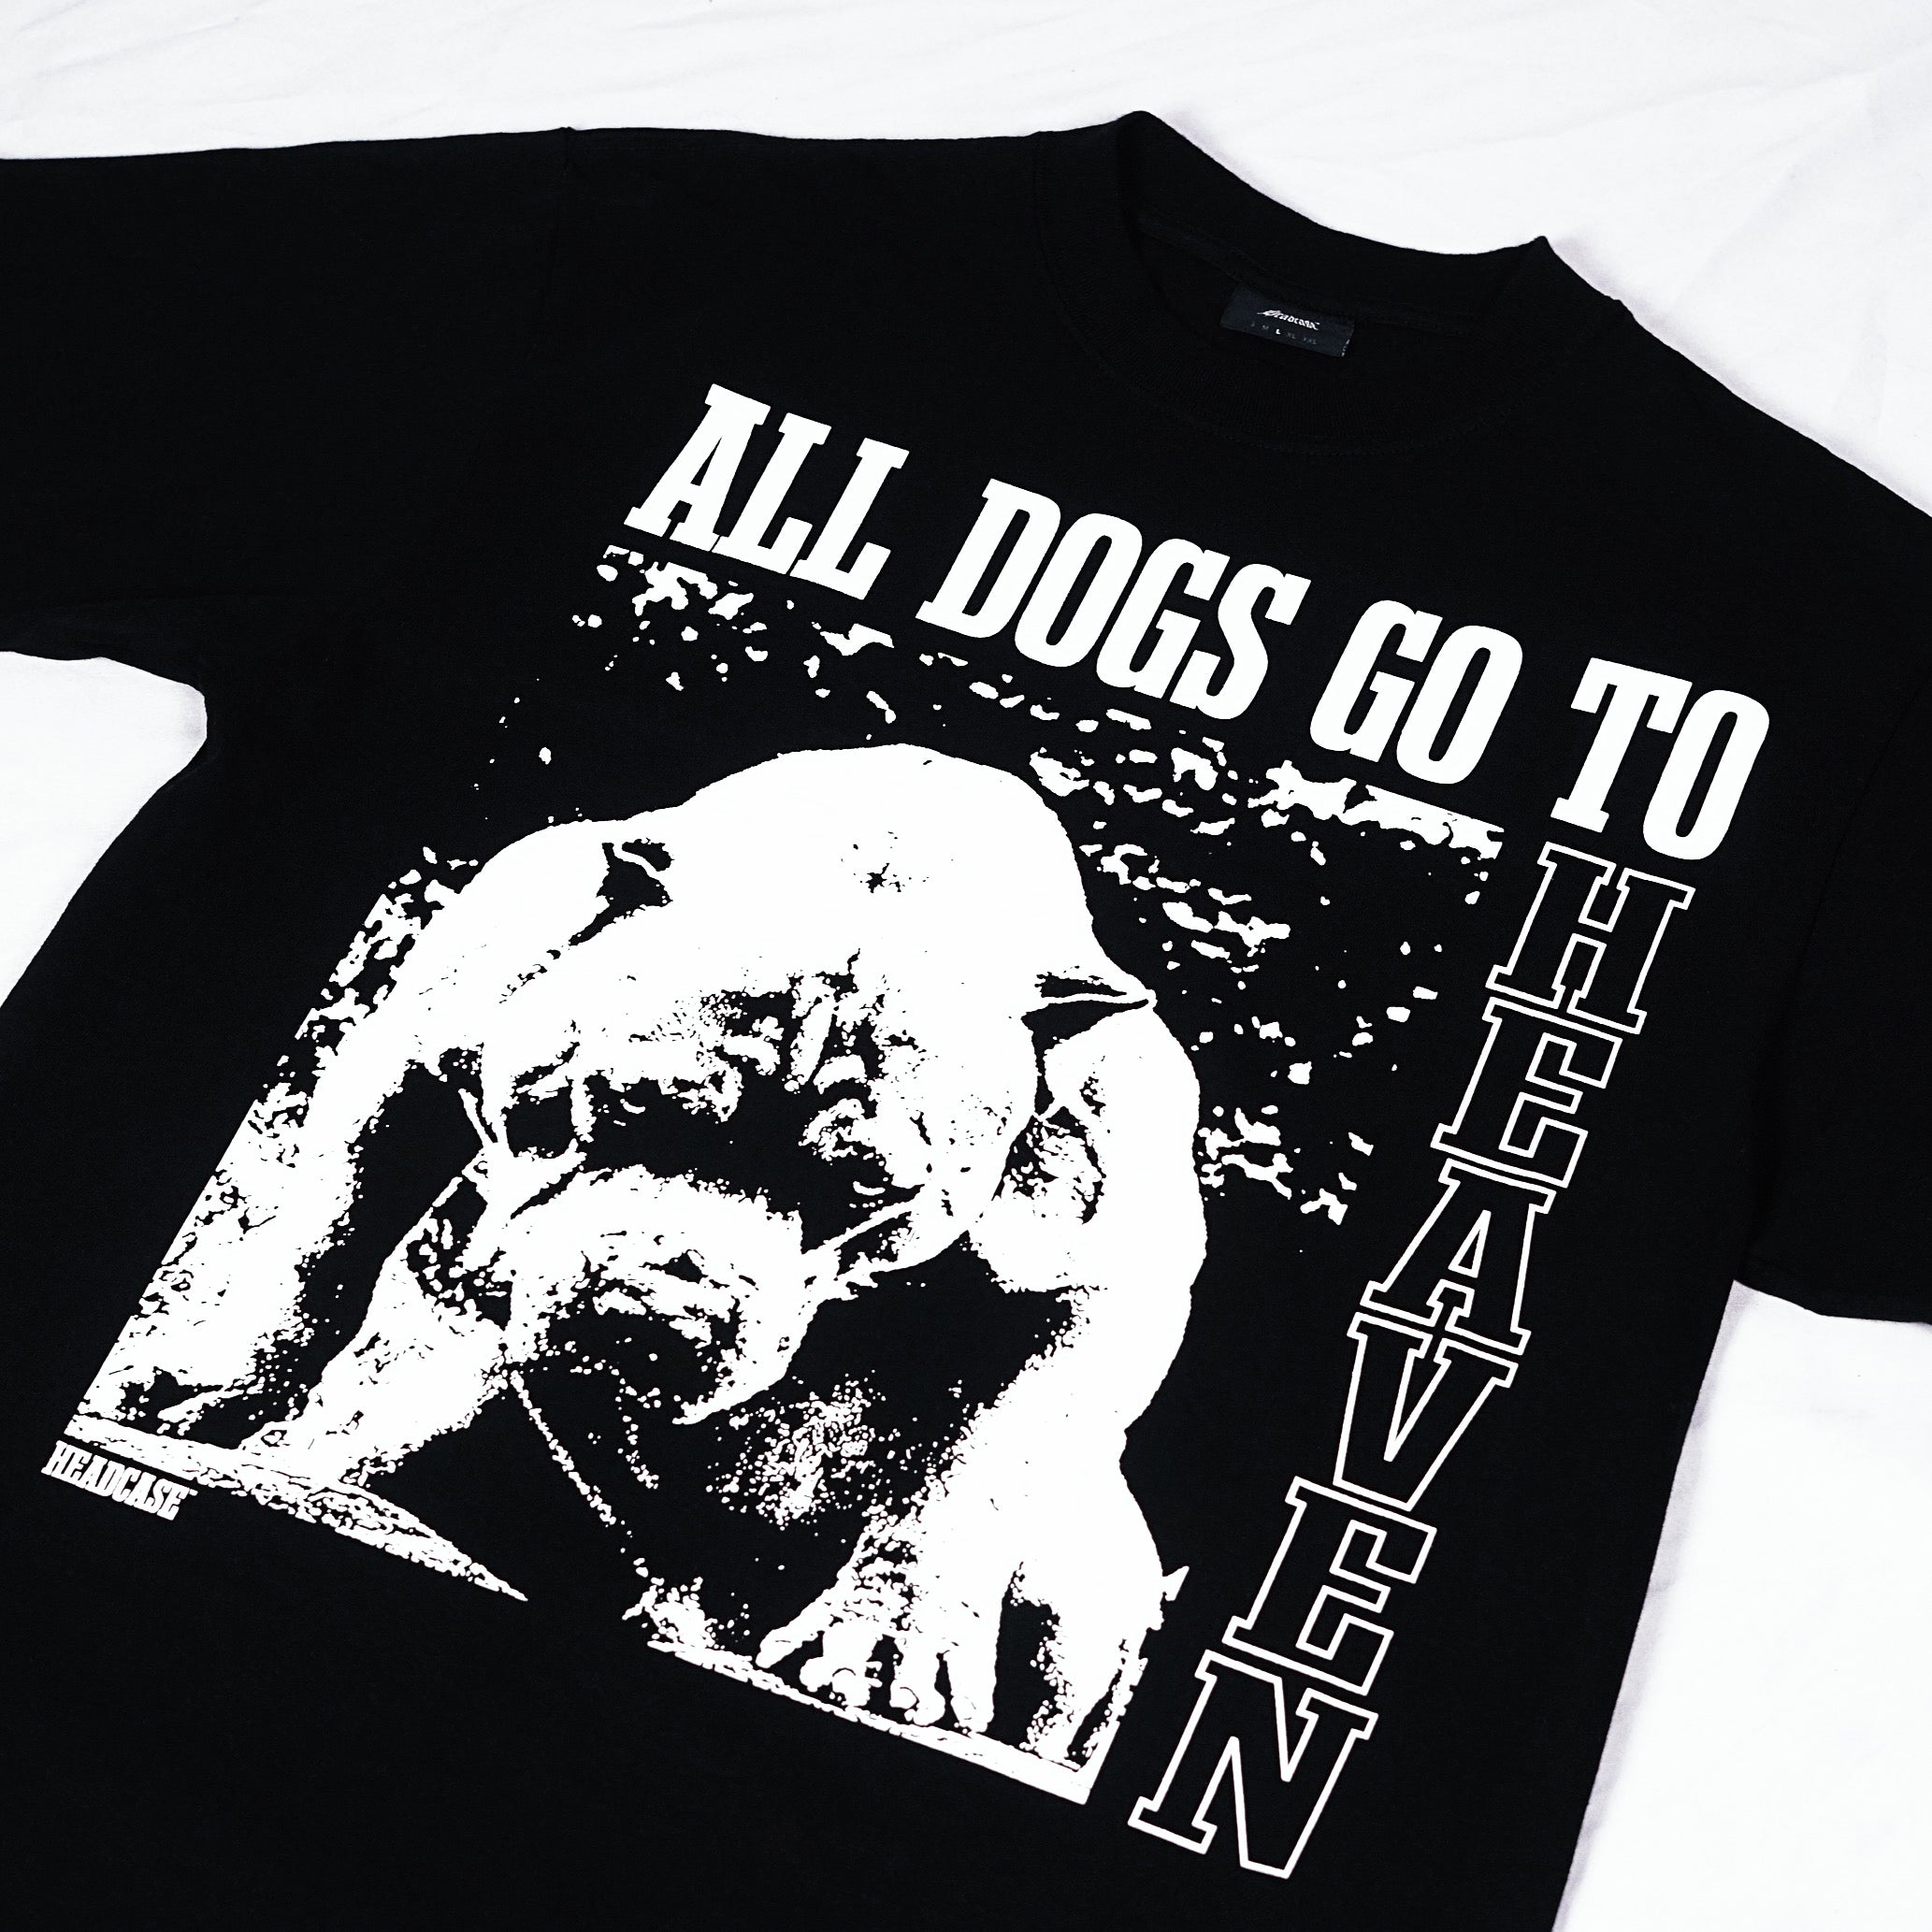 "ALL DOGS GO TO HEAVEN" T-SHIRT (BLACK)